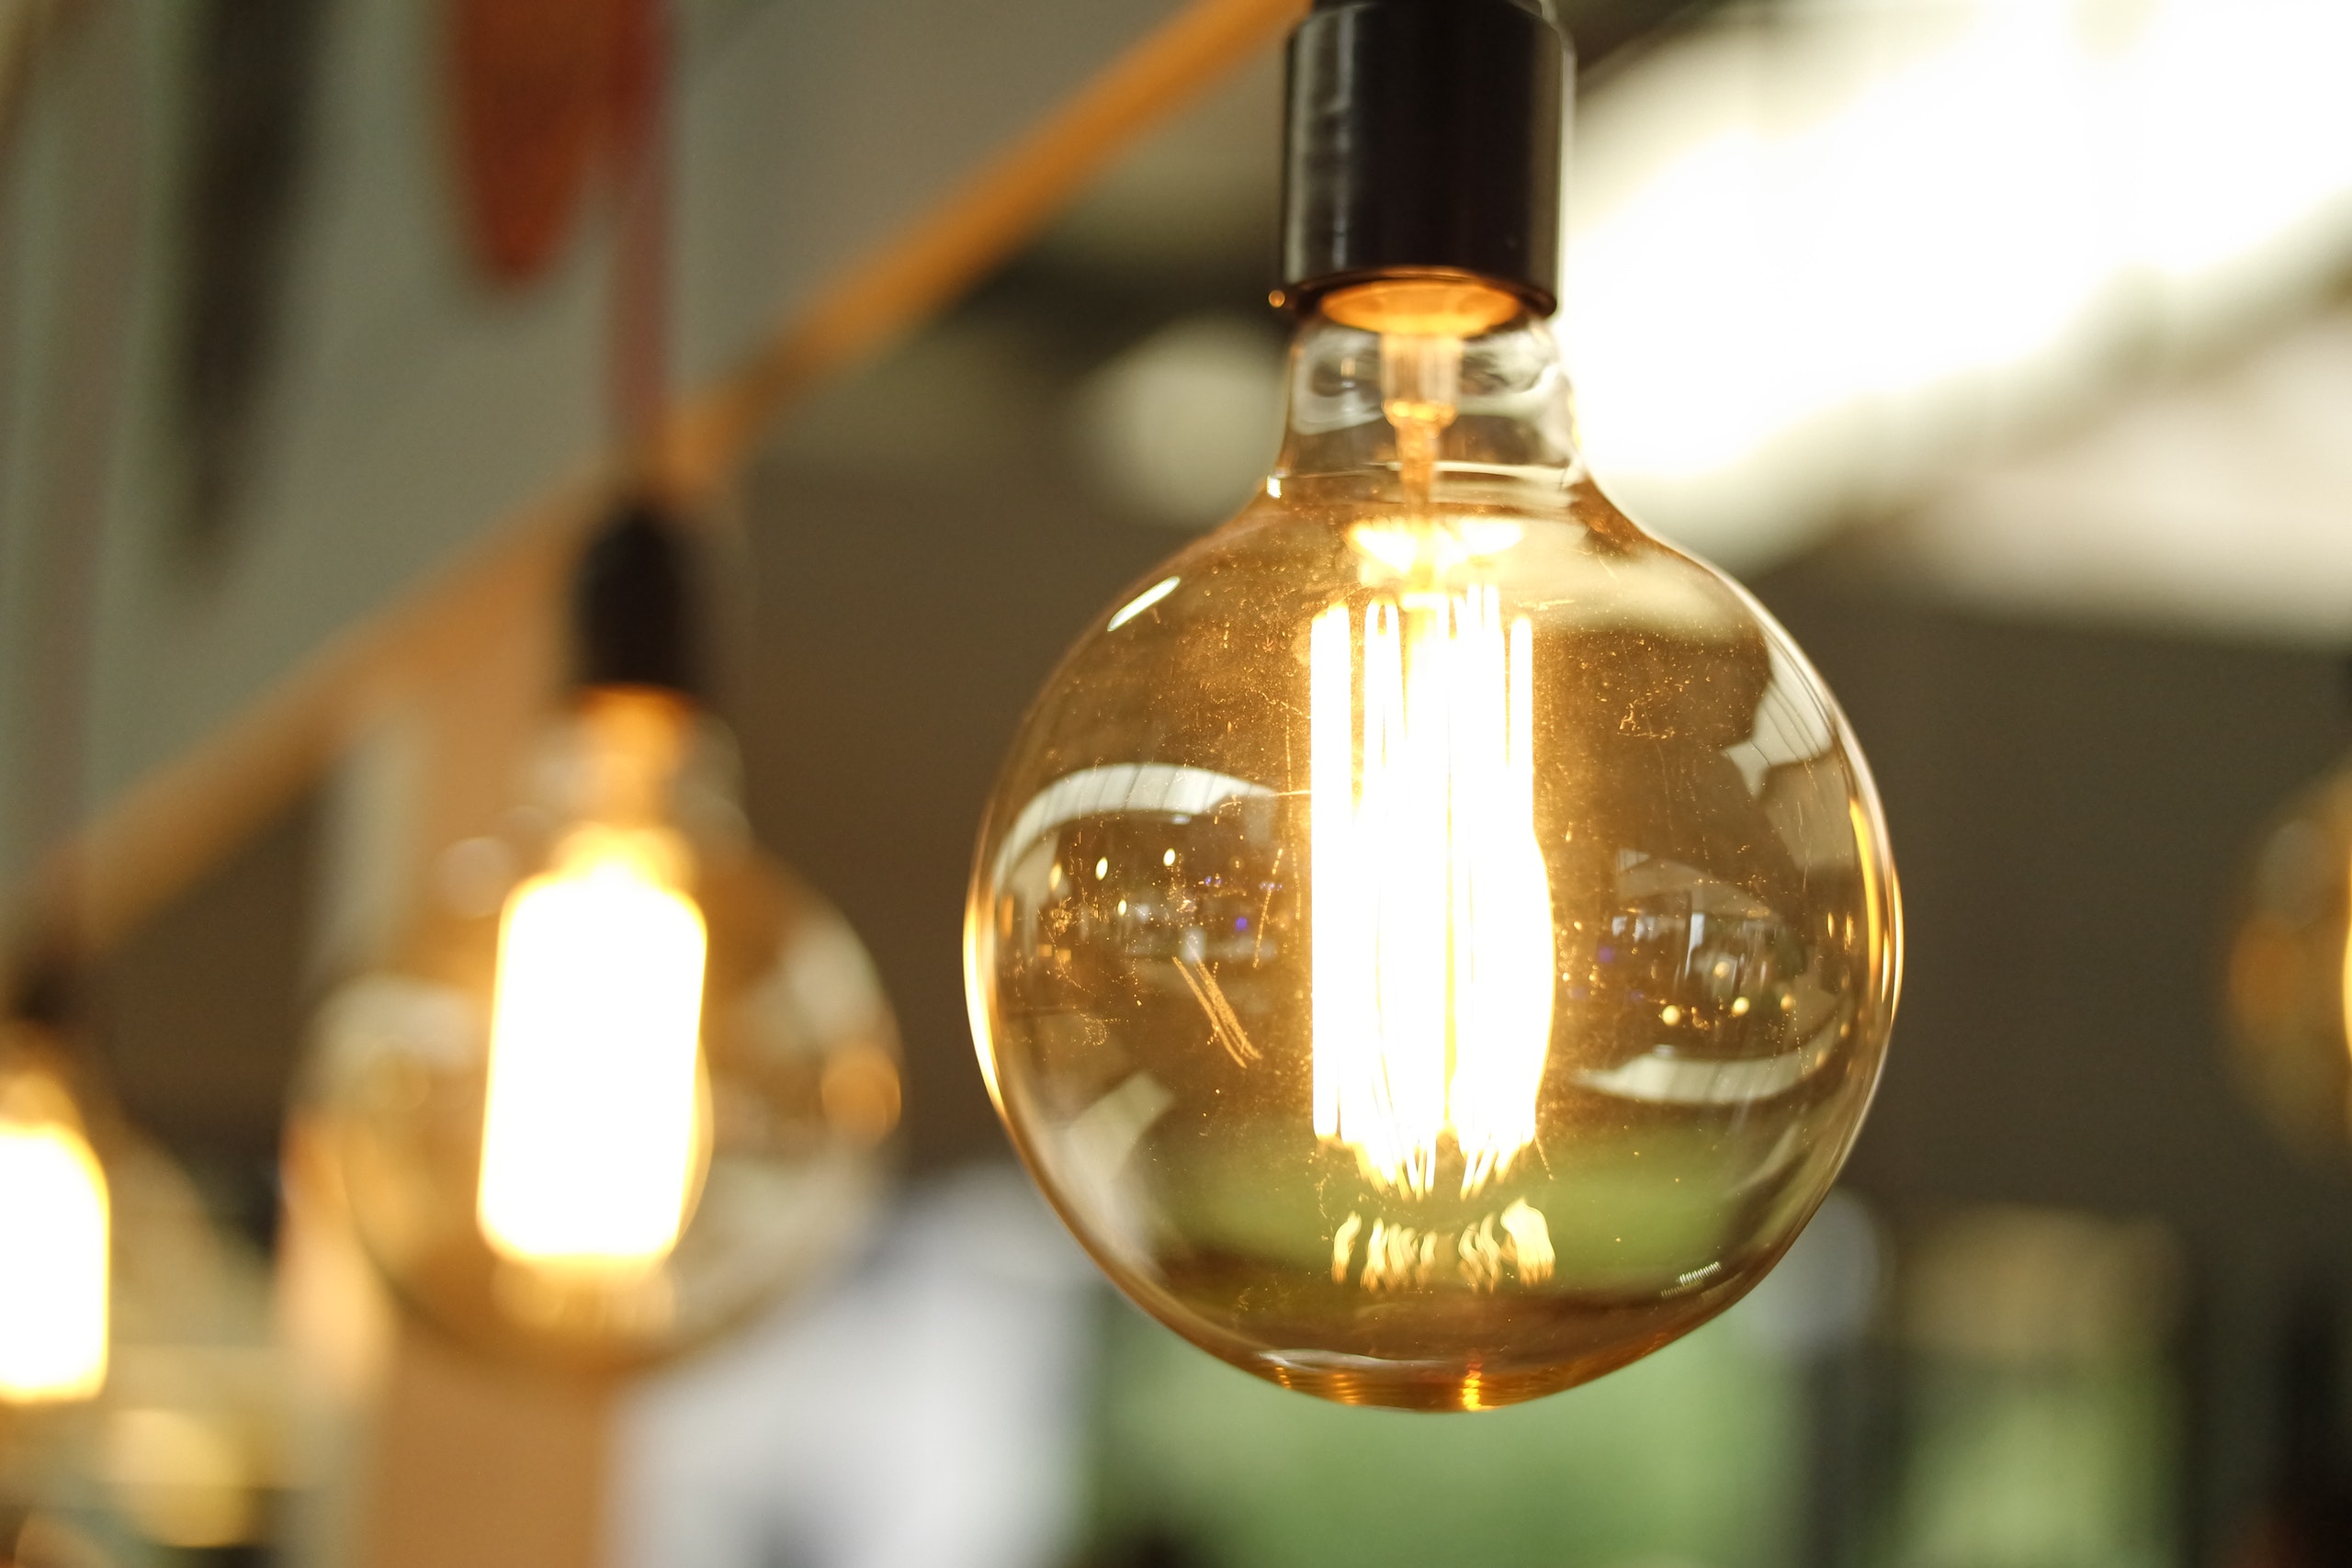 5 major ways to reduce energy consumption at home